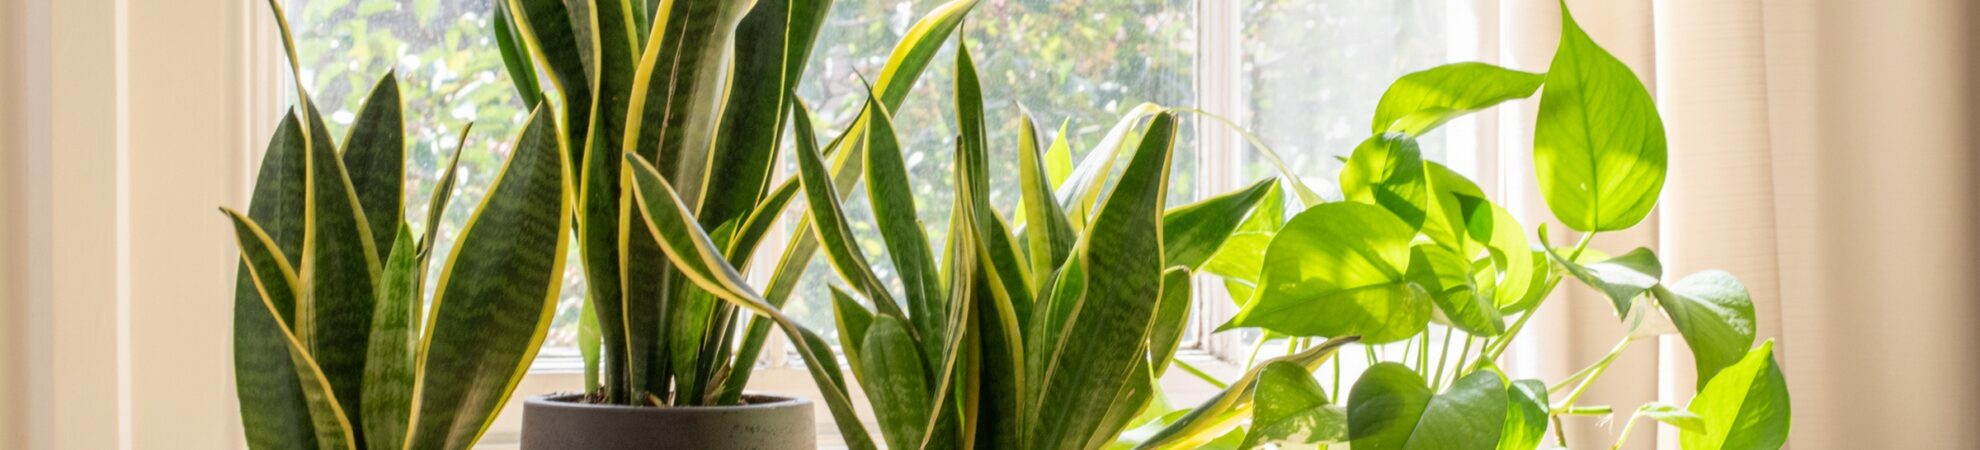 Indoor houseplants next to a window in a beautifully designed home or flat interior.